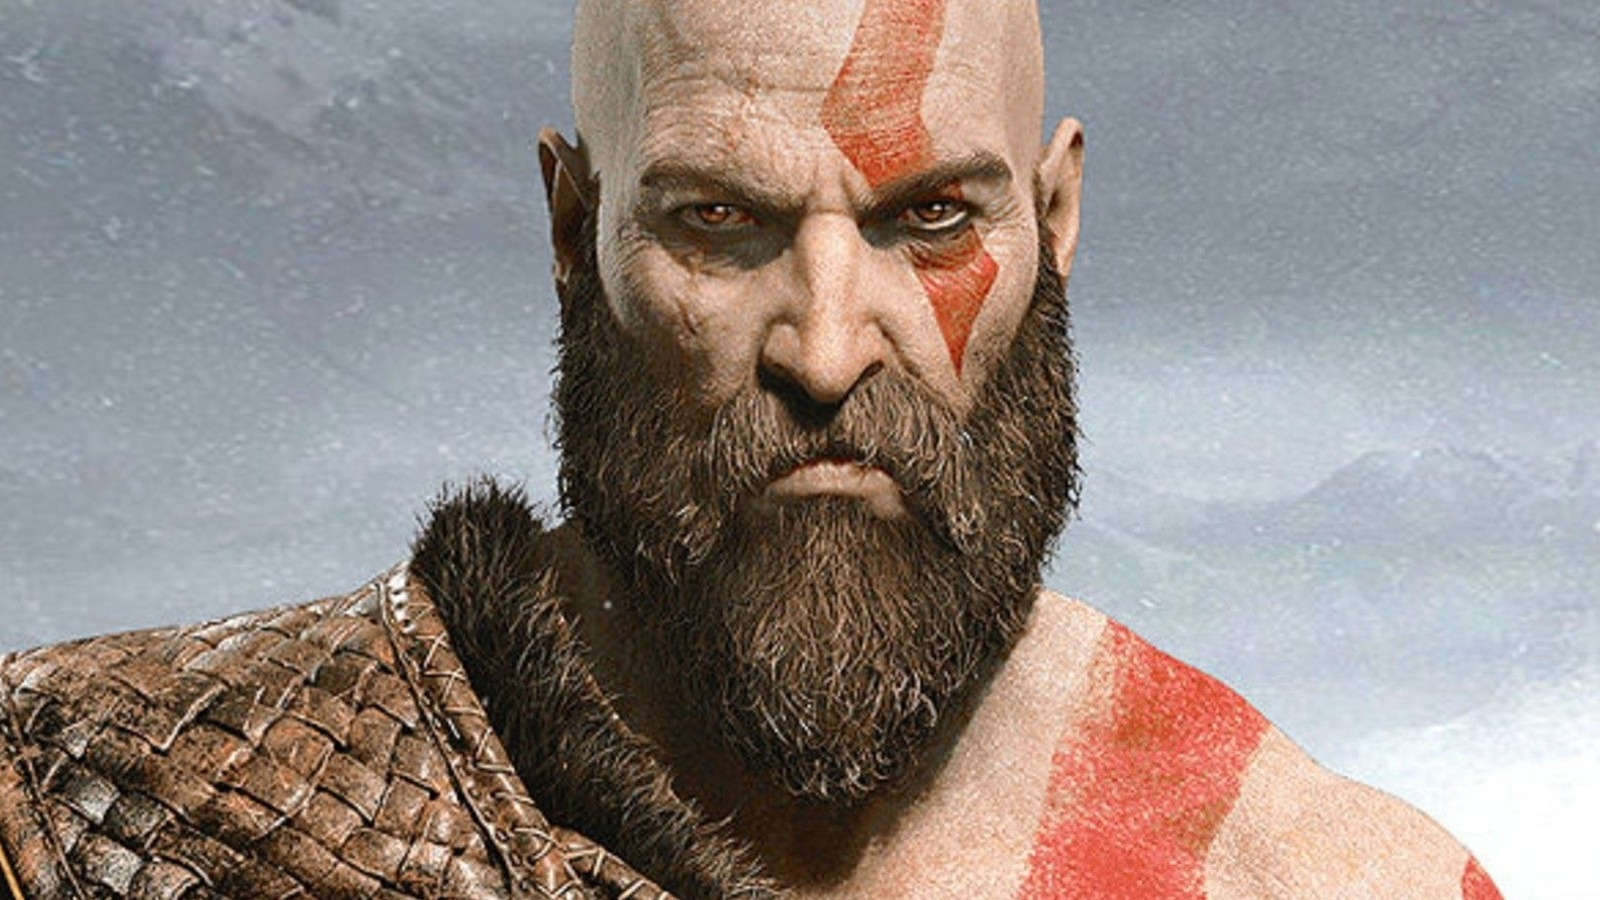 God of War PC version found in GeForce database. What do y'all